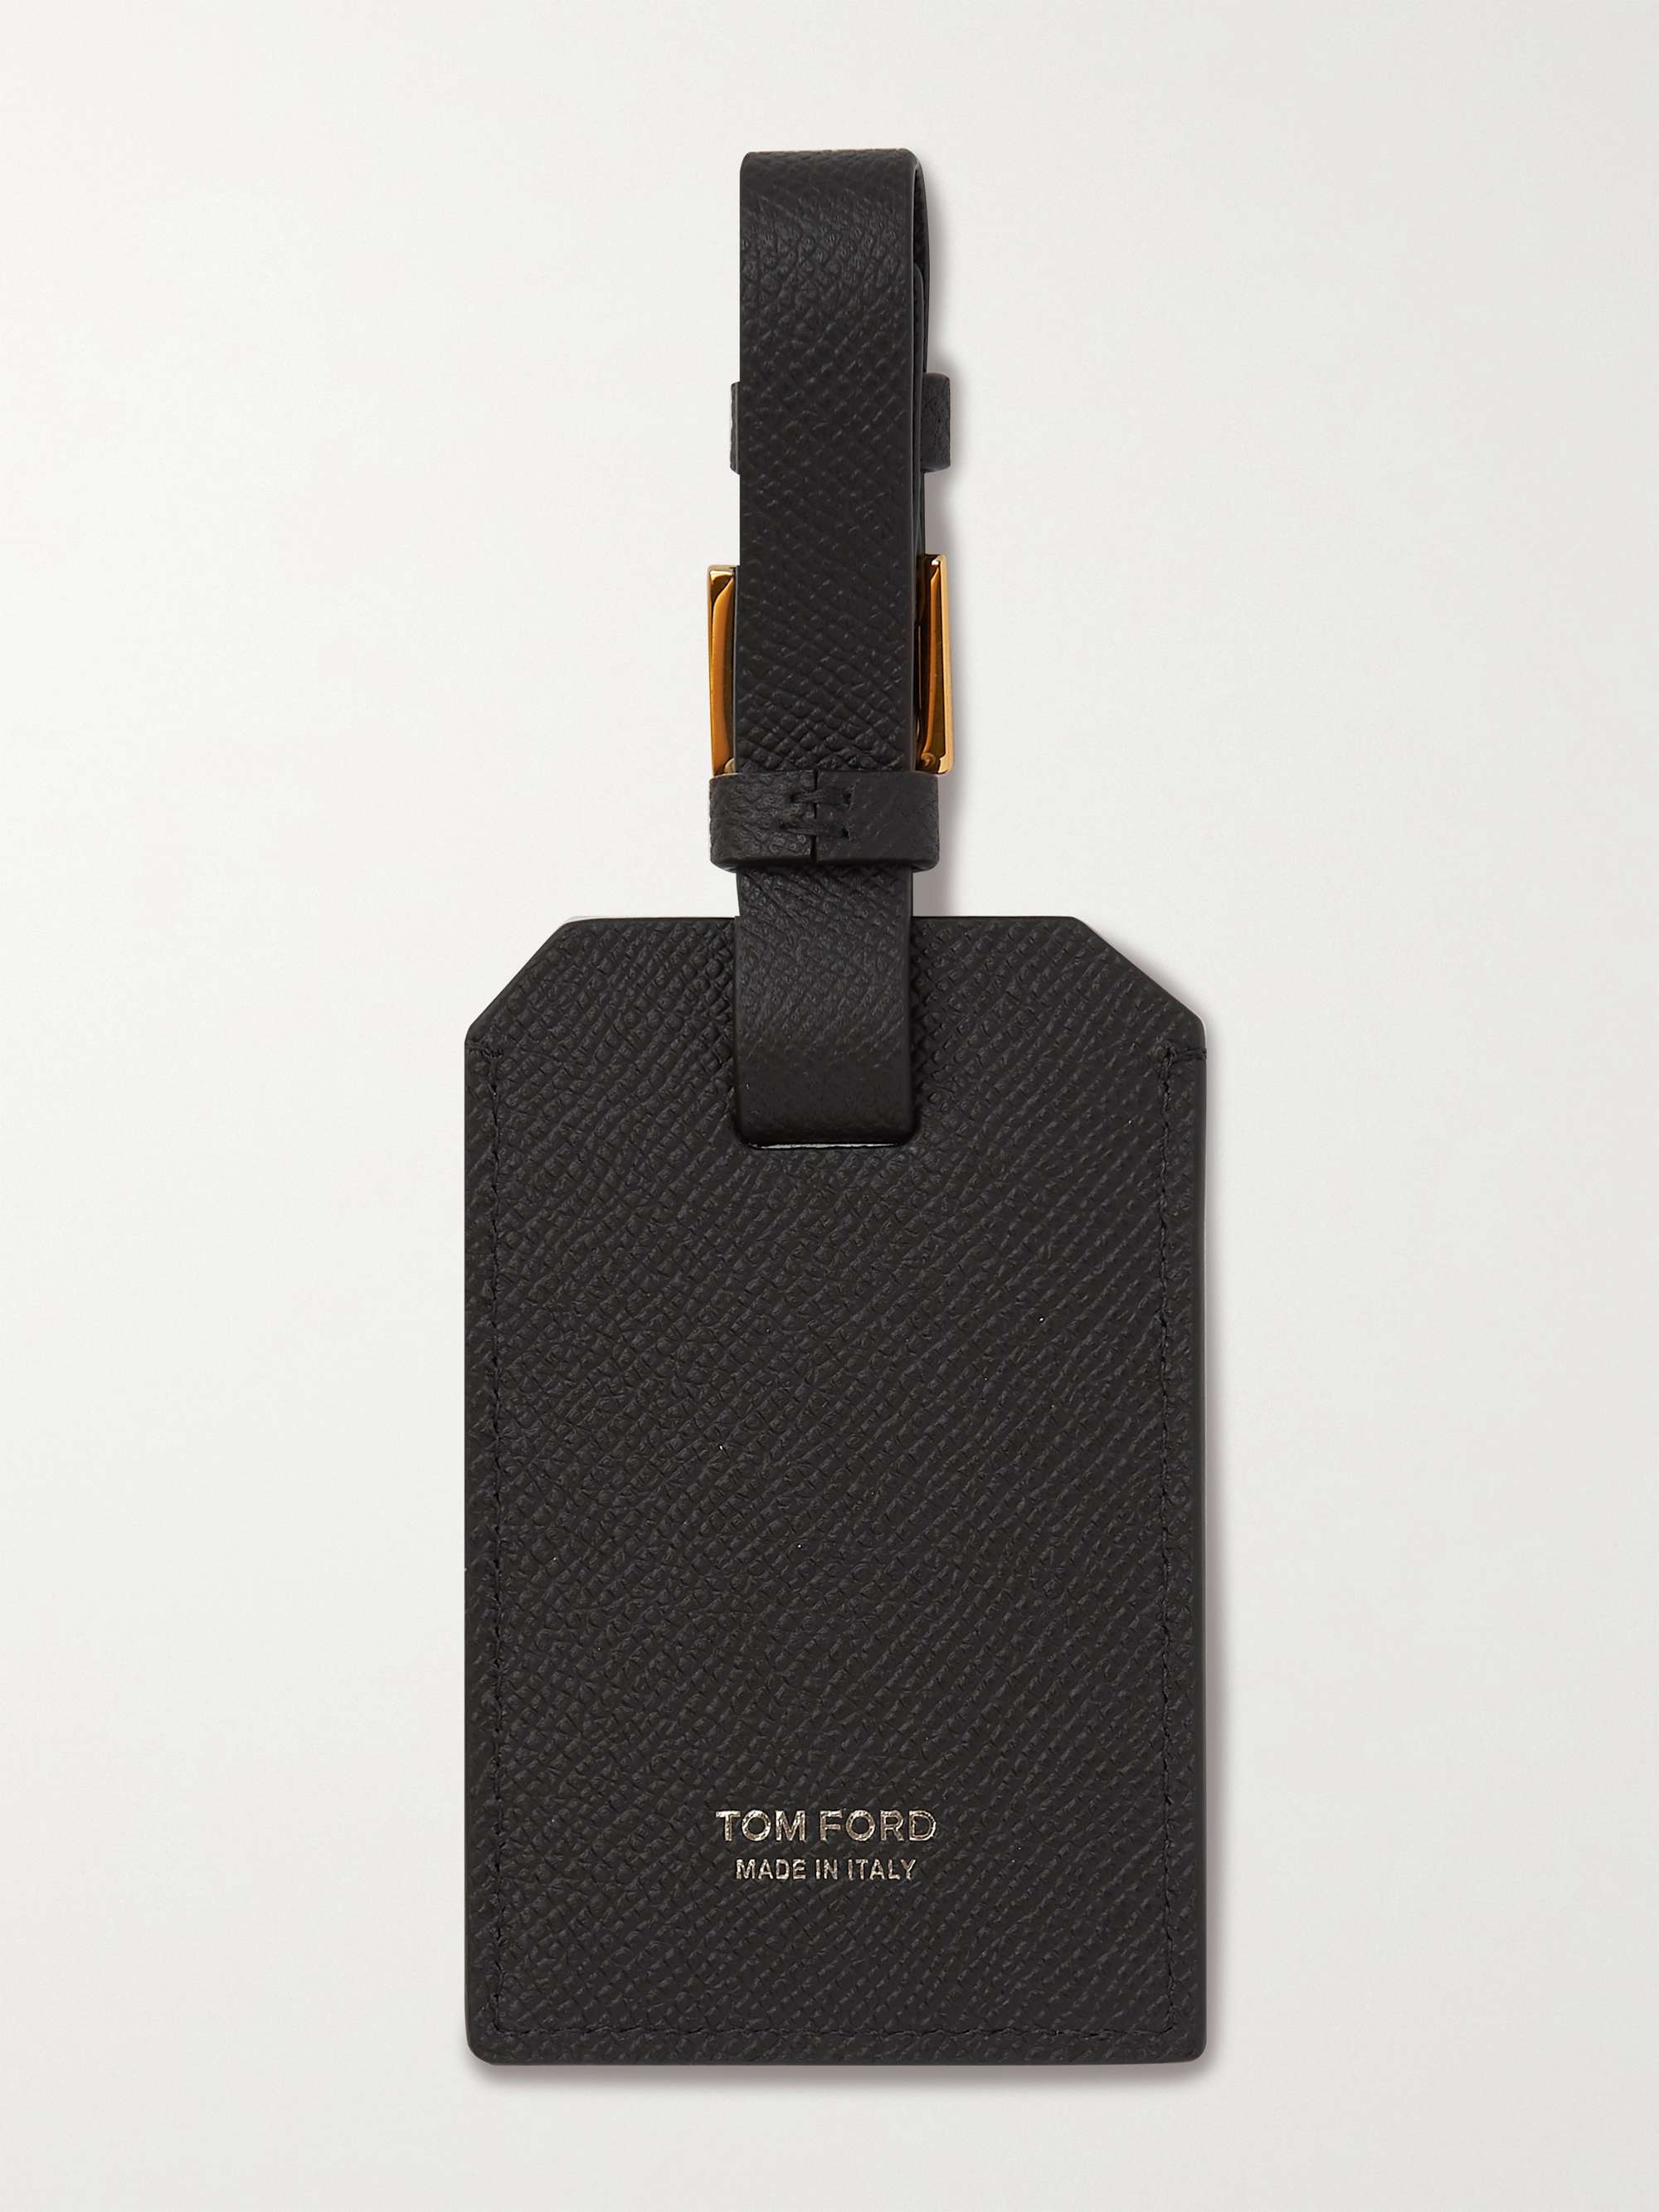 TOM FORD Full-Grain Leather Luggage Tag